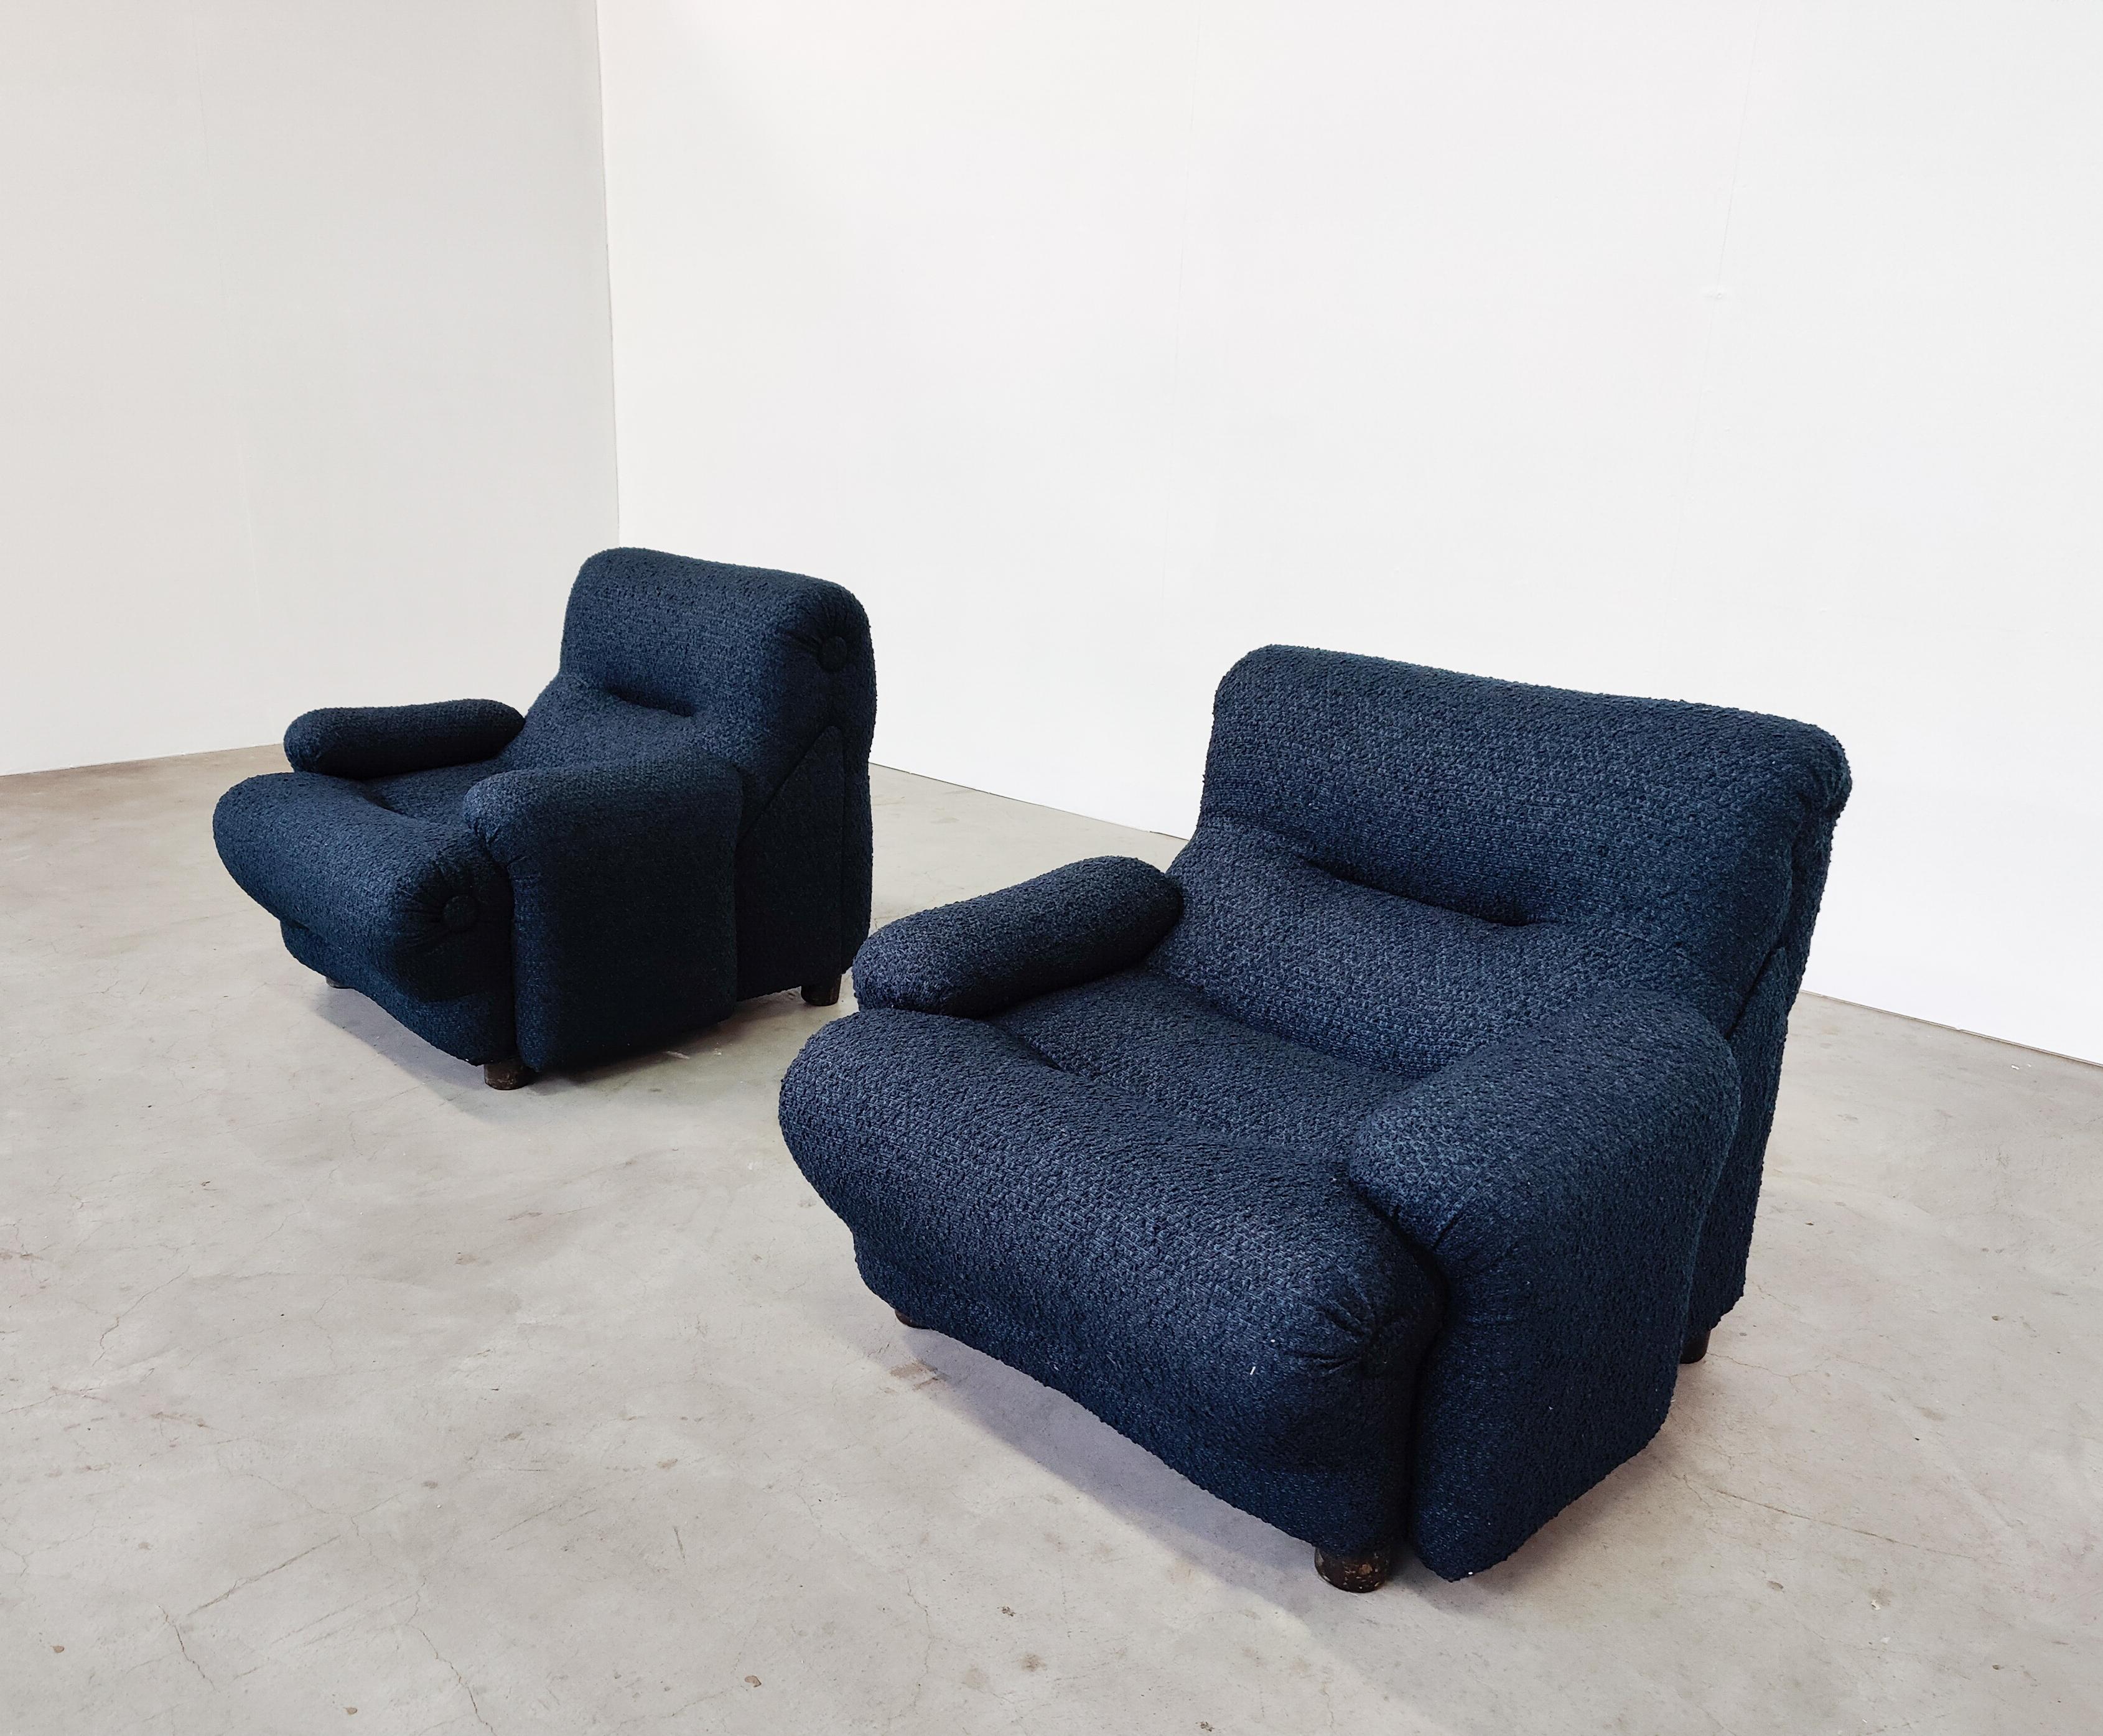 Pair of Rezia Lounge chairs by Emilio Guarnacci and Felix Padovano for 1P, 1960s
New upholstery
Italian design.